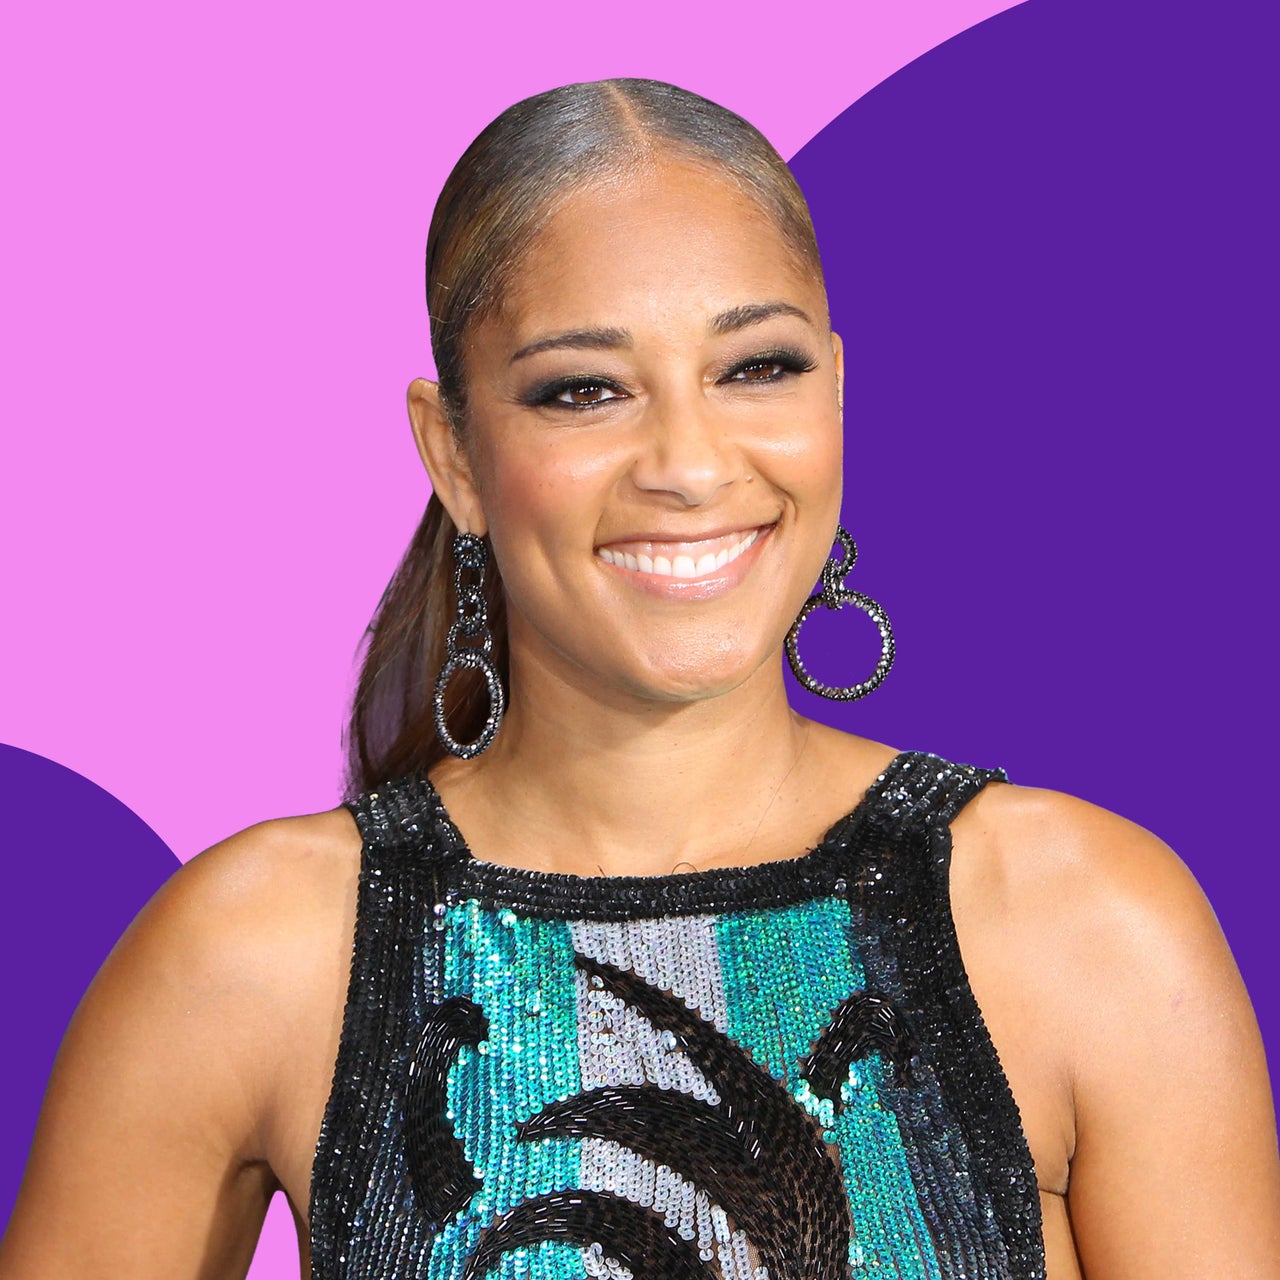 Amanda Seales Clears The Air About That Jordans And Passport ...